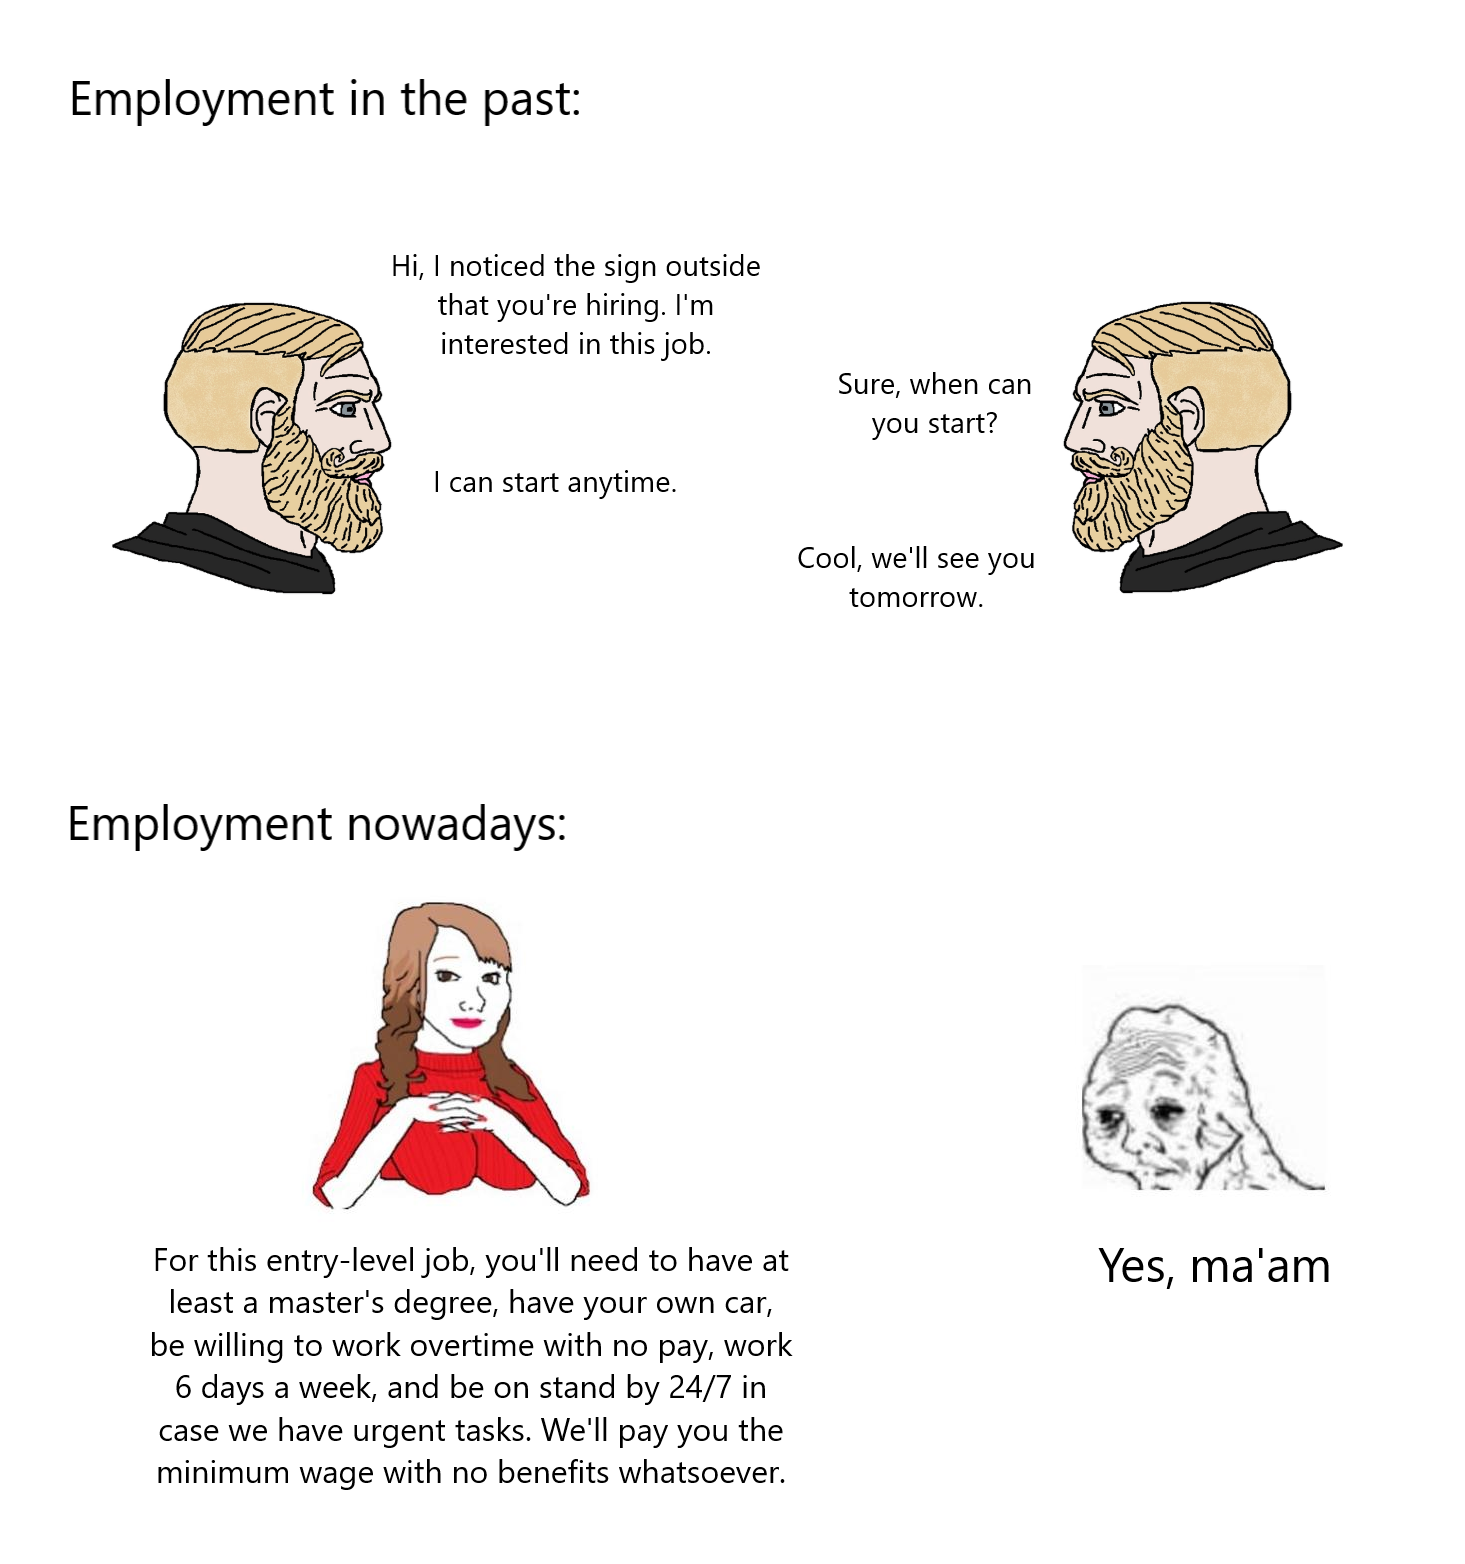 fresh memes - cartoon - Employment in the past Hi, I noticed the sign outside that you're hiring. I'm interested in this job. I can start anytime. Employment nowadays Sure, when can you start? Cool, we'll see you tomorrow. For this entrylevel job, you'll 